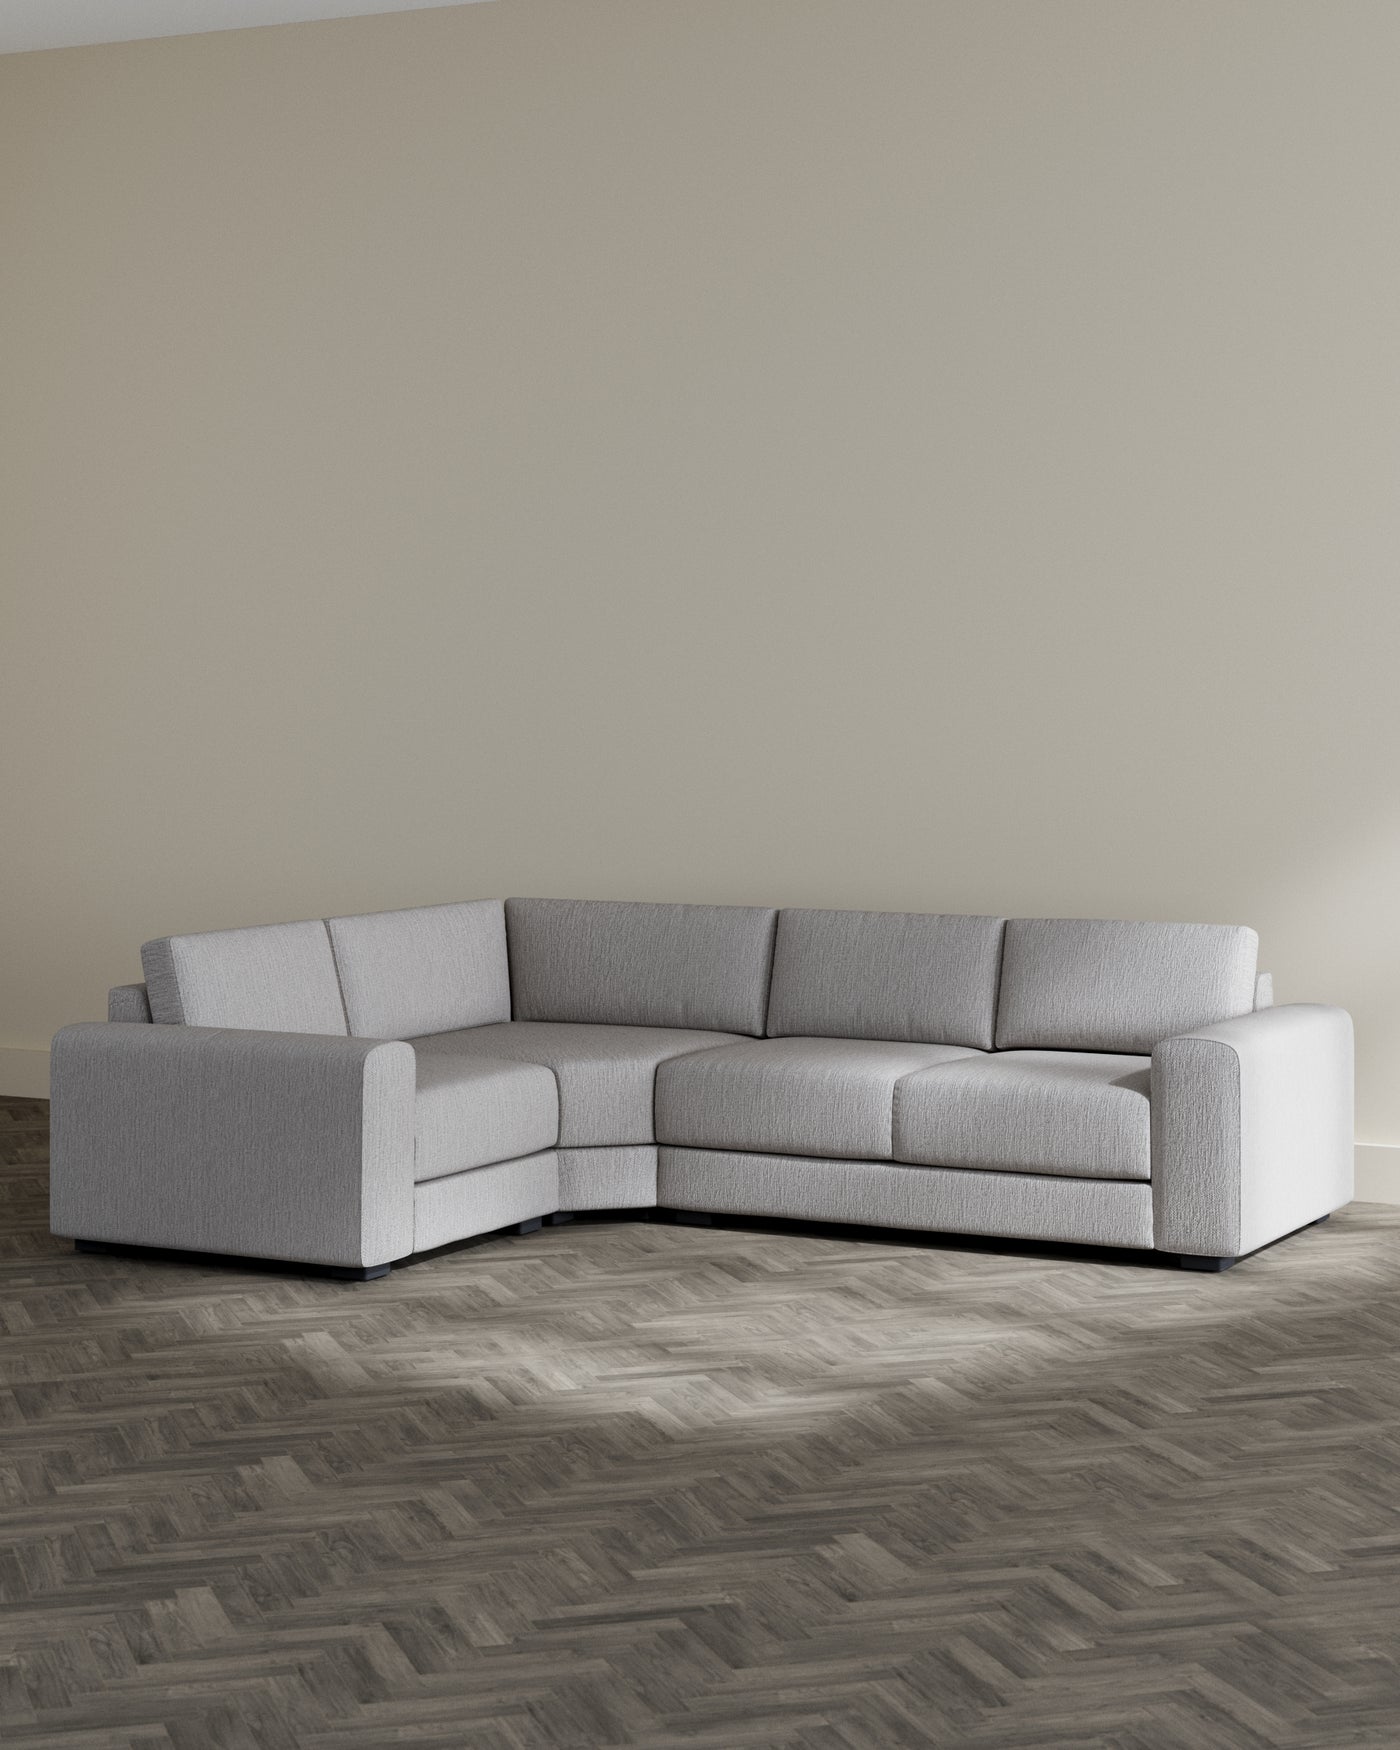 Modern light grey sectional sofa with a plush texture and a simple, contemporary design. Features clean lines, wide armrests, and a modular form that can be arranged to suit various living spaces. Set against a neutral-toned wall on a dark herringbone-patterned floor.